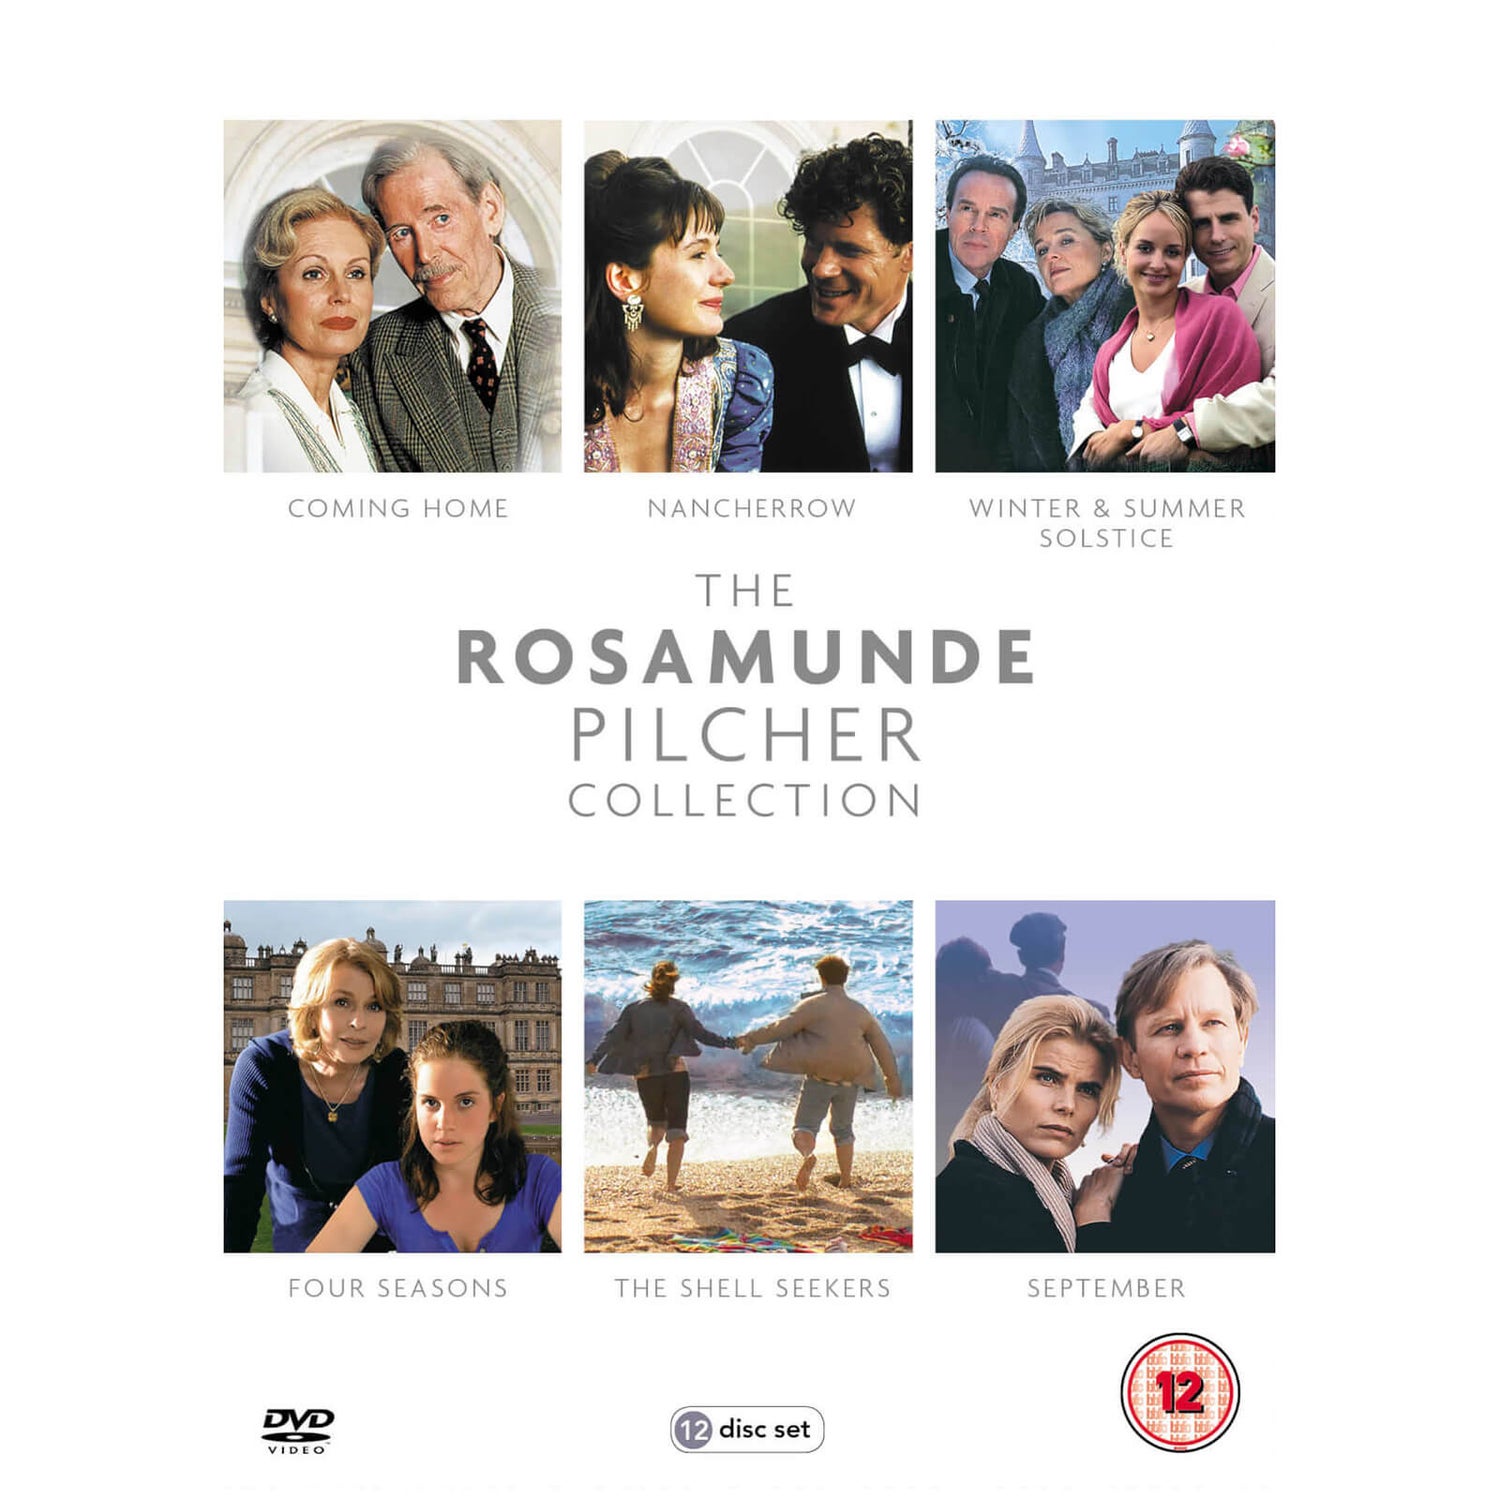 The Rosamunde Pilcher Collection